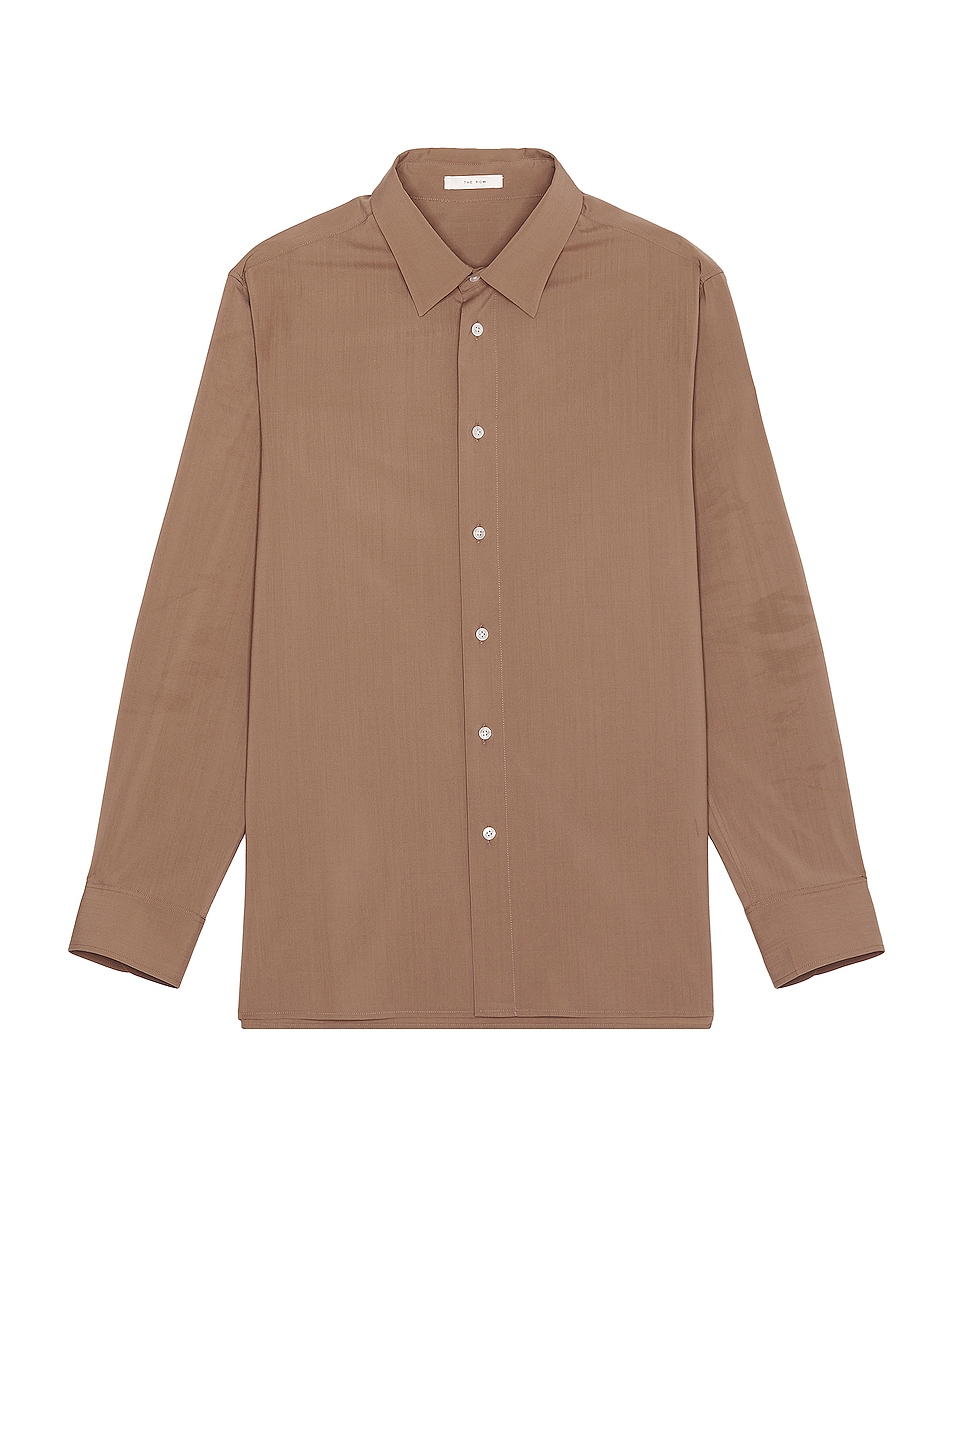 Image 1 of The Row Julio Shirt in Toffee